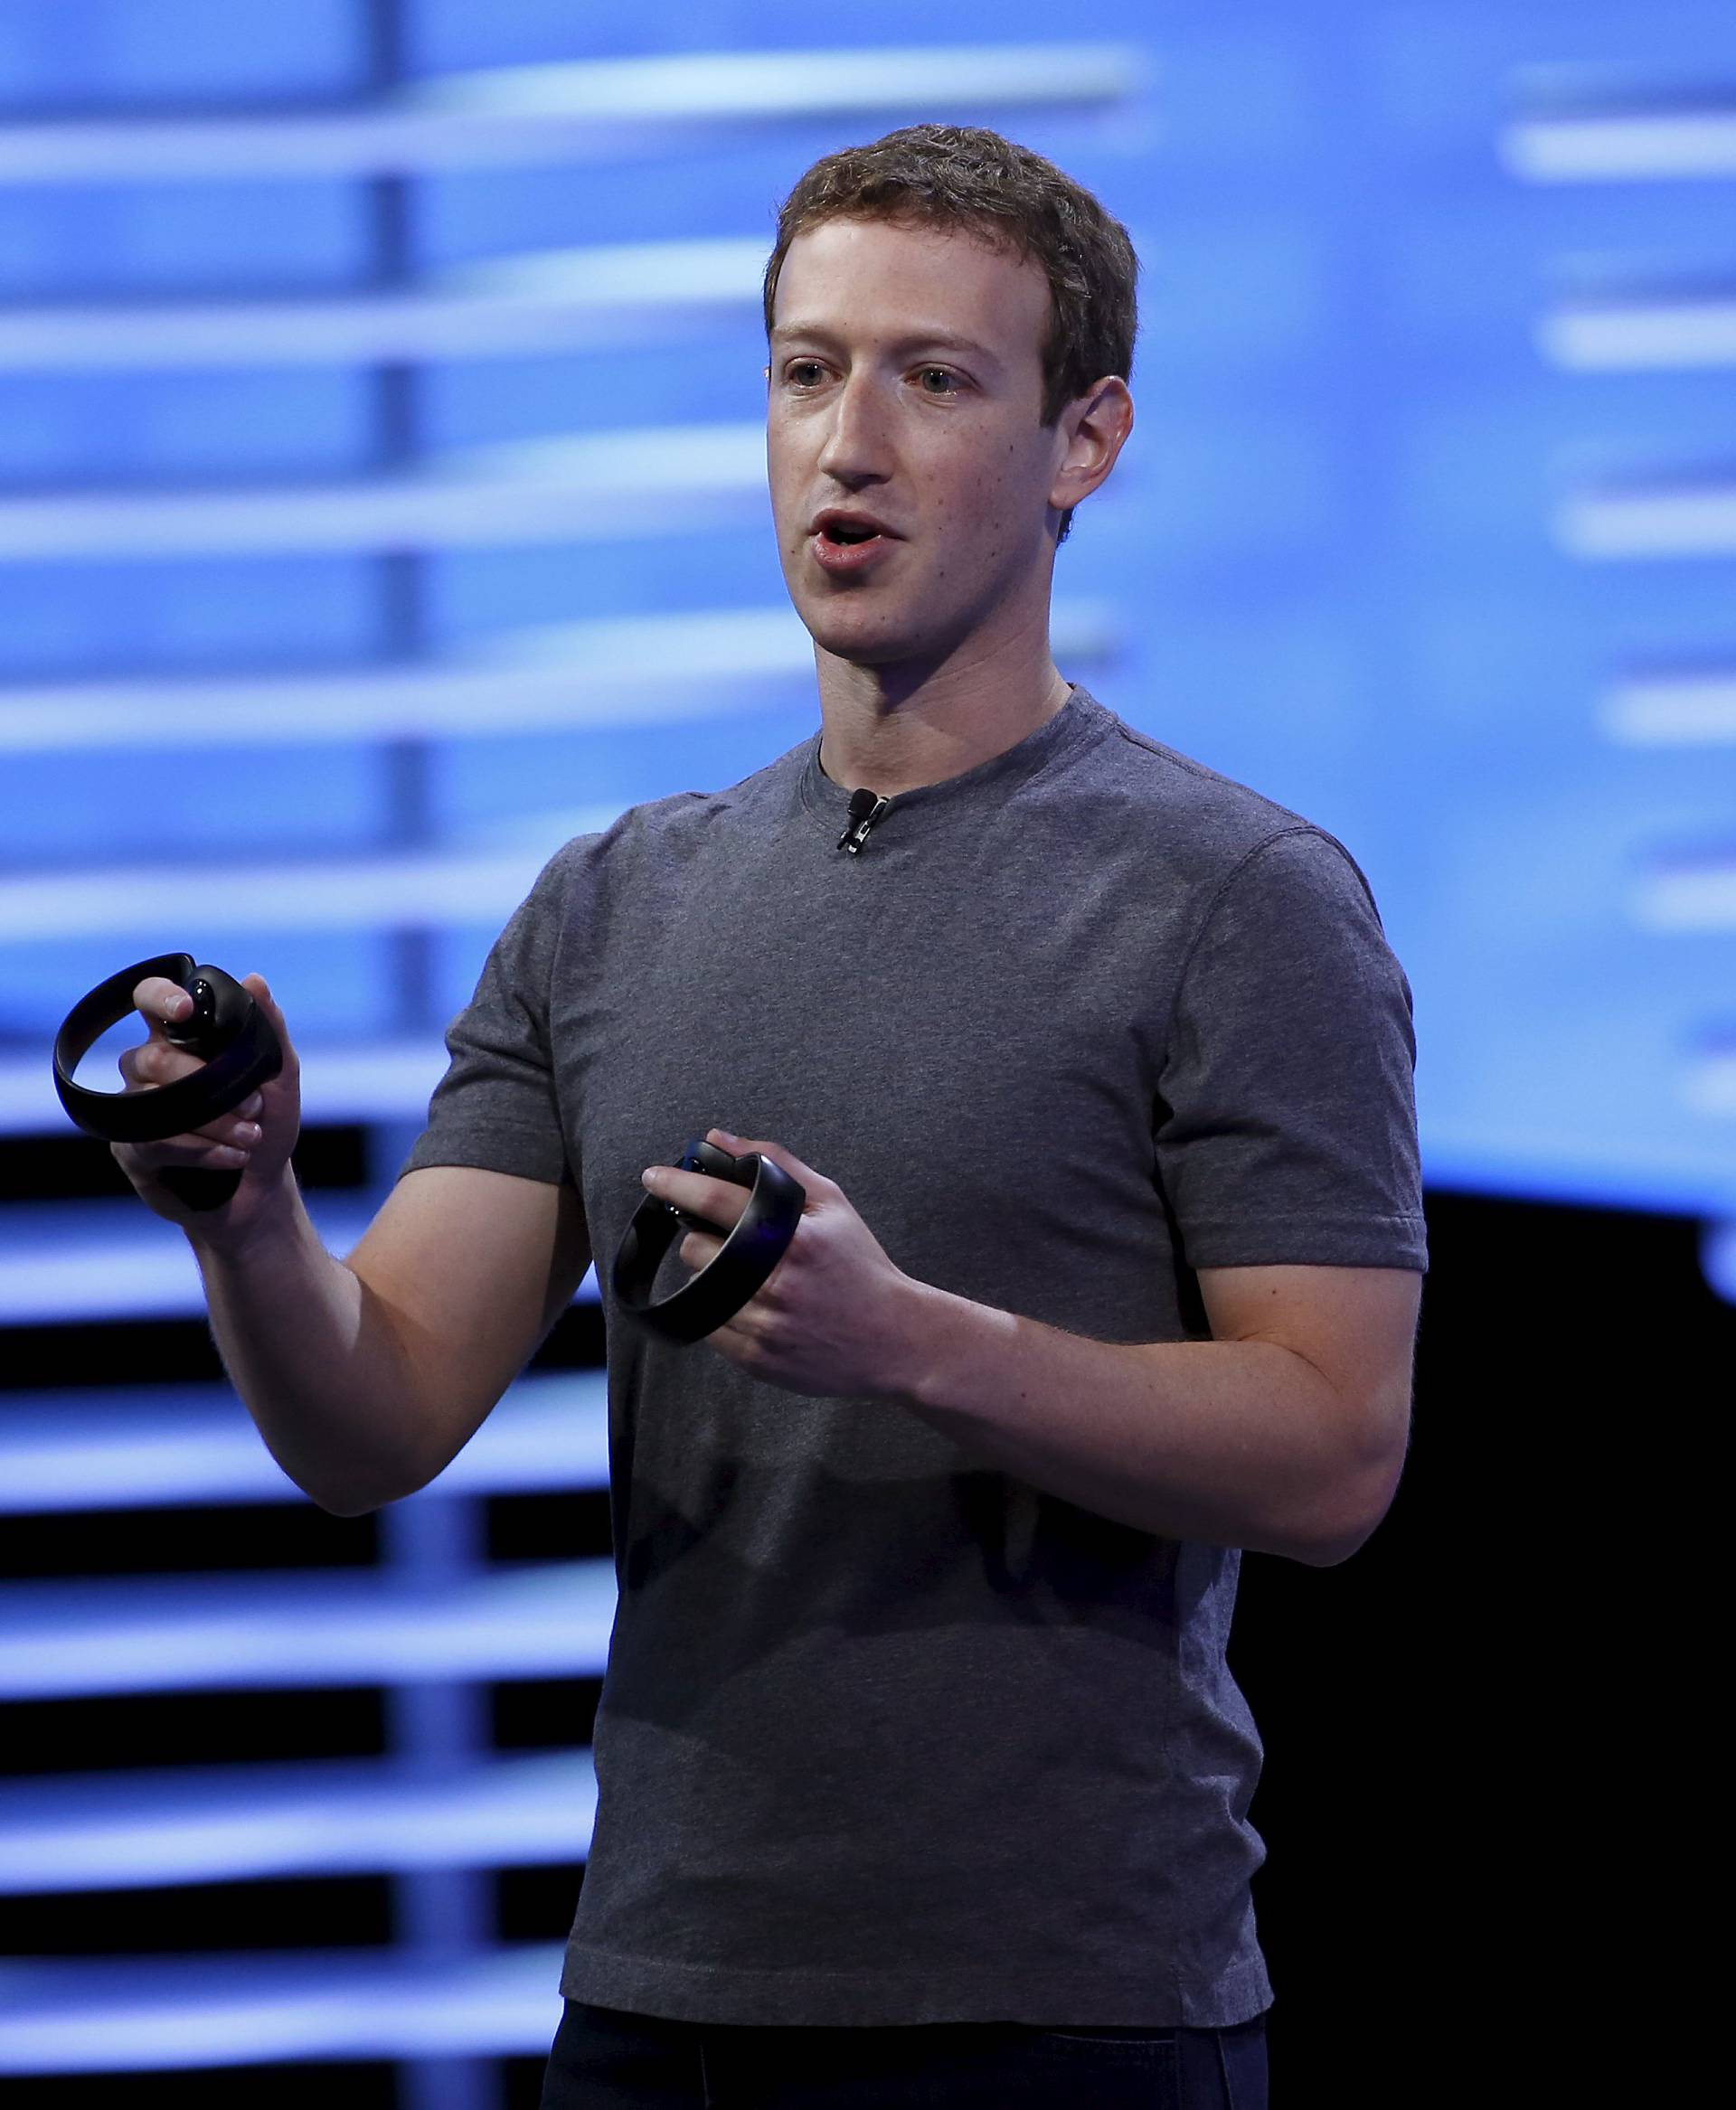 Facebook CEO Mark Zuckerberg holds a pair of the touch controllers for the Oculus Rift virtual reality headsets during the Facebook F8 conference in San Francisco, California